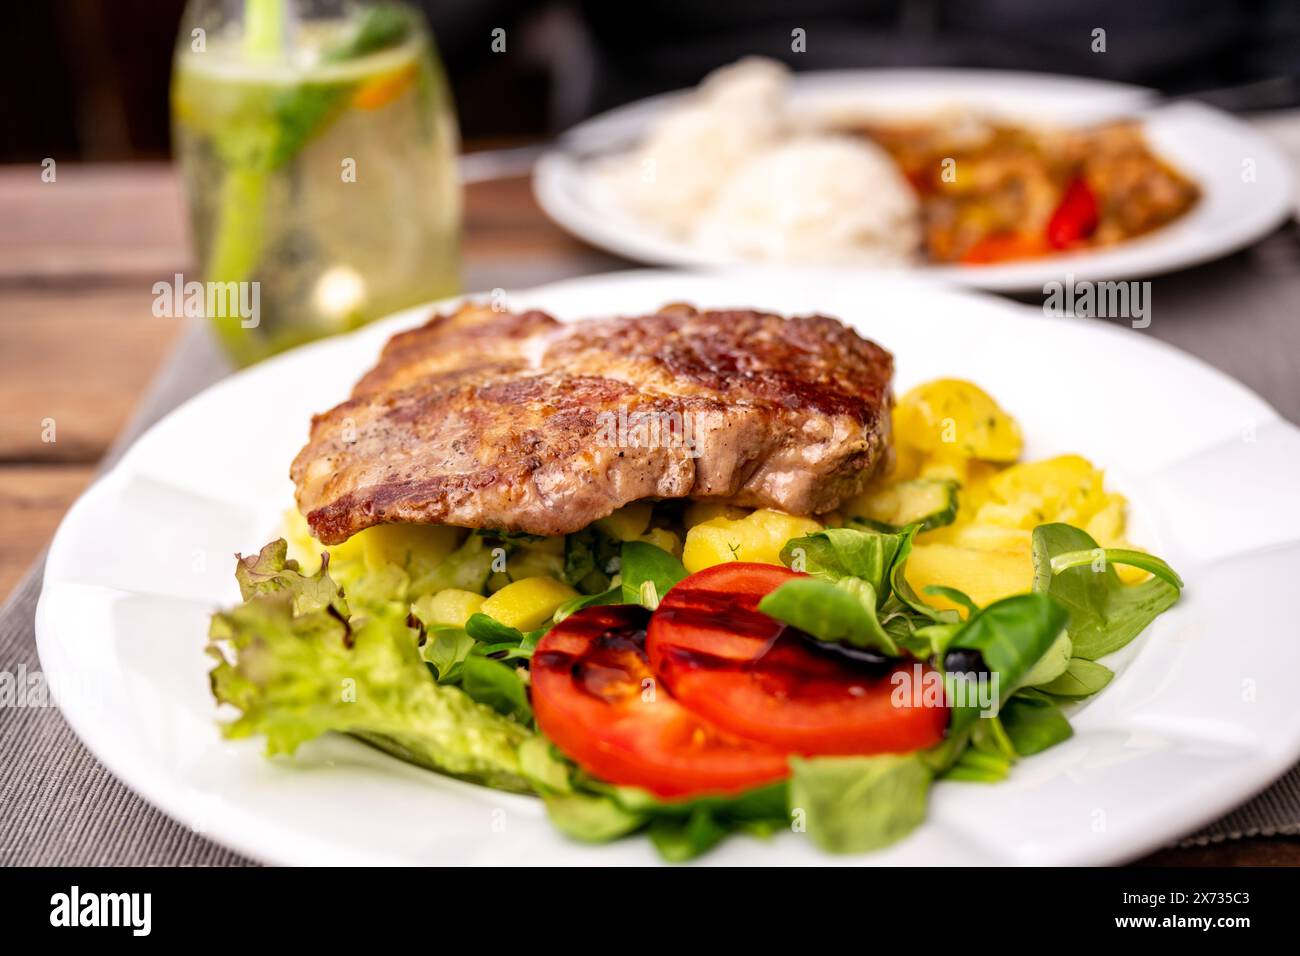 Pork steak on potato salad with vegetable on first white plate, drink in glass and second plate with rice, chicken meat and red pepper on background o Stock Photo